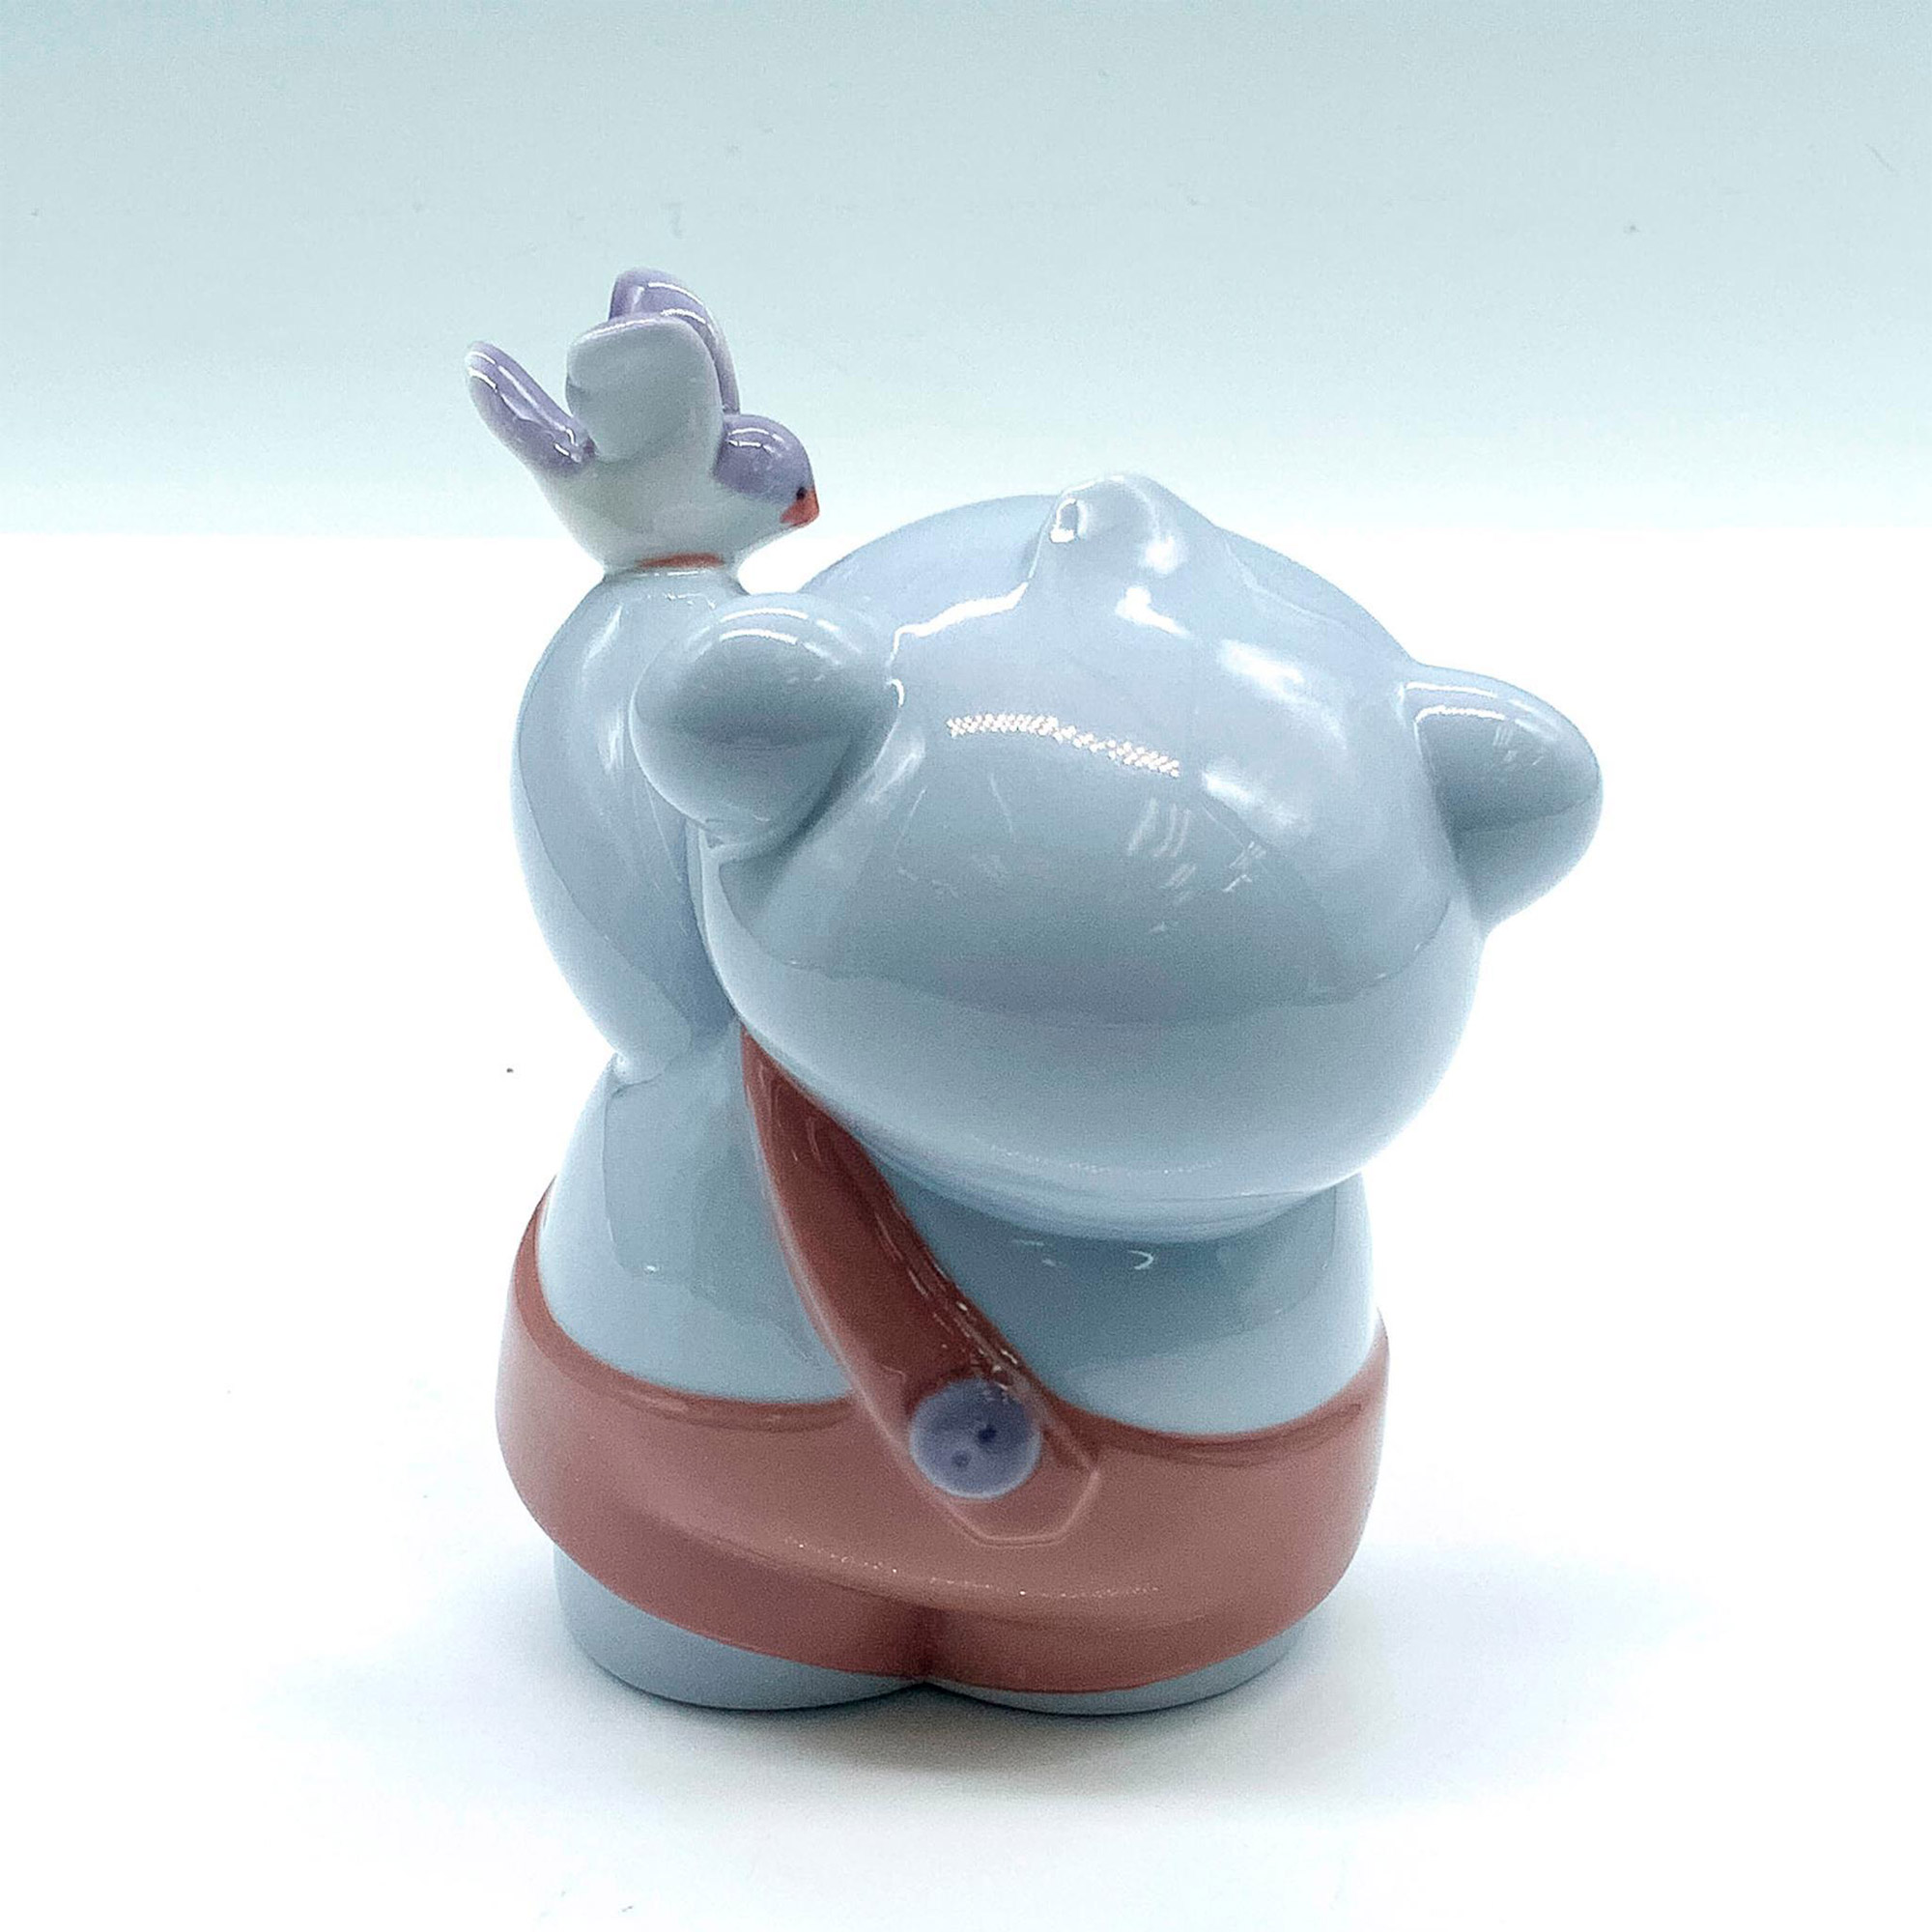 Nao by Lladro Porcelain Figurine, Fly Away 2001507 - Image 2 of 4